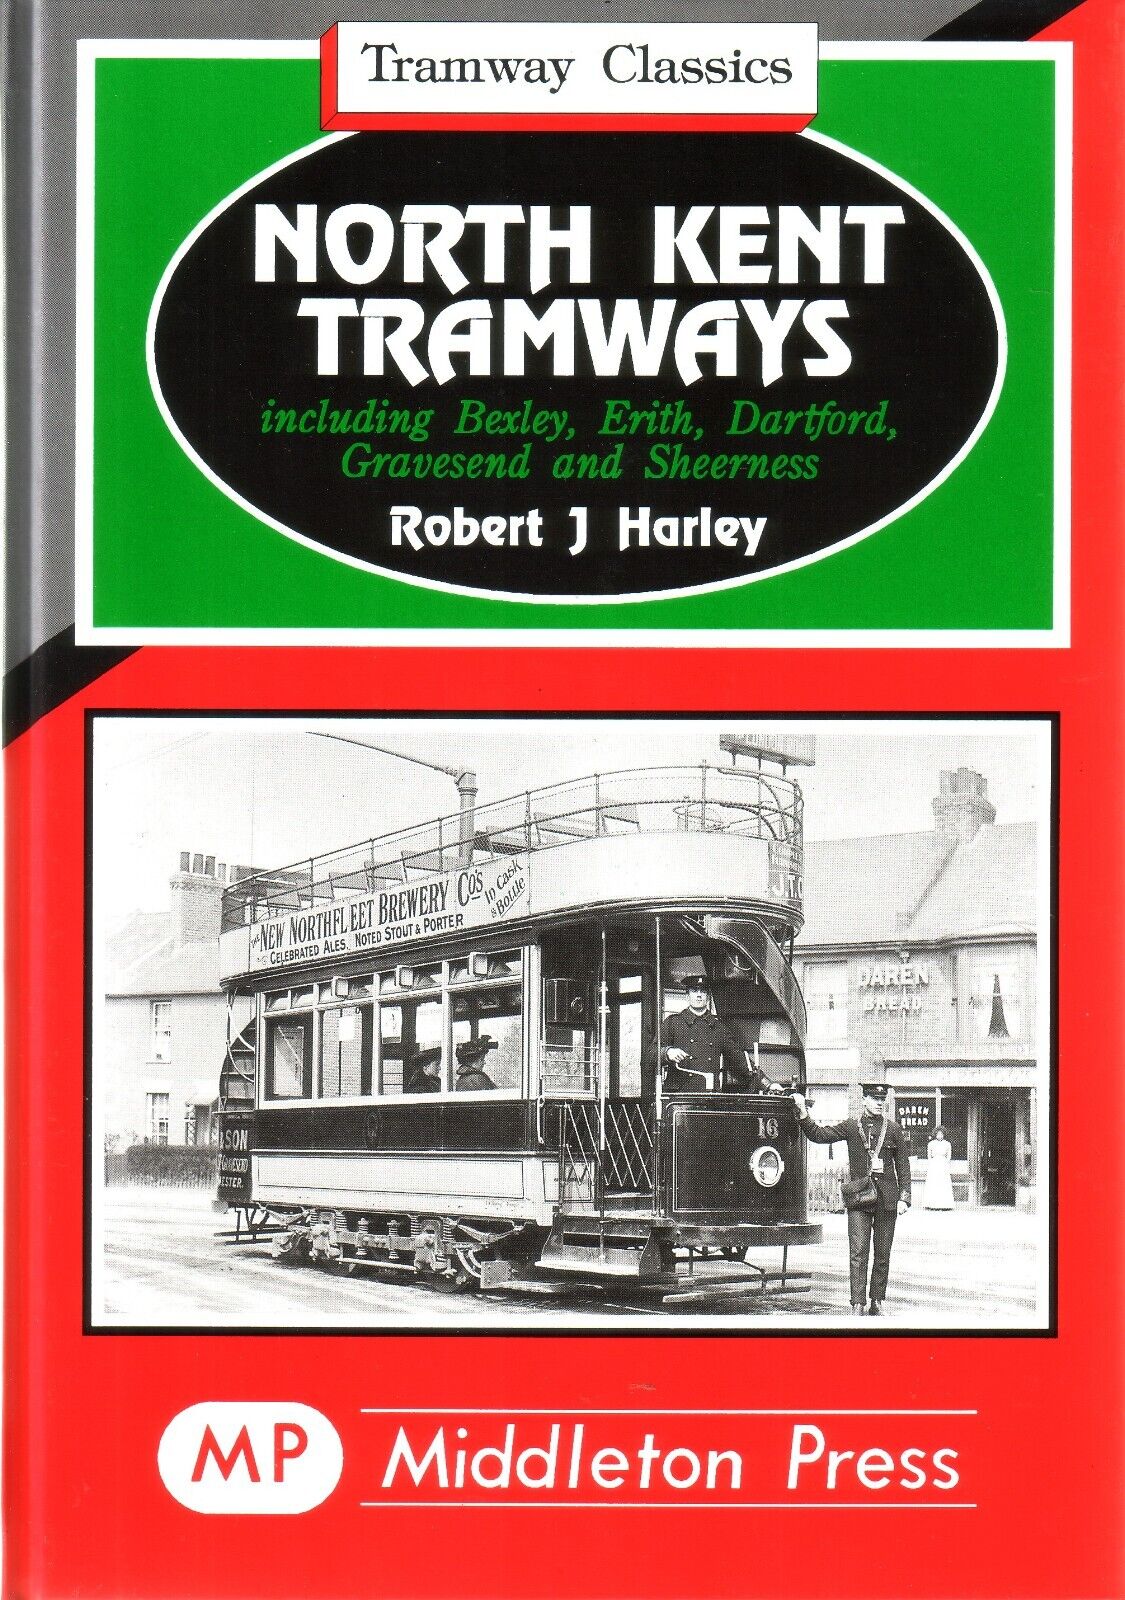 Tramway Classics North Kent Tramways including Bexley, Erith, Dartford, Gravesend and Sheerness